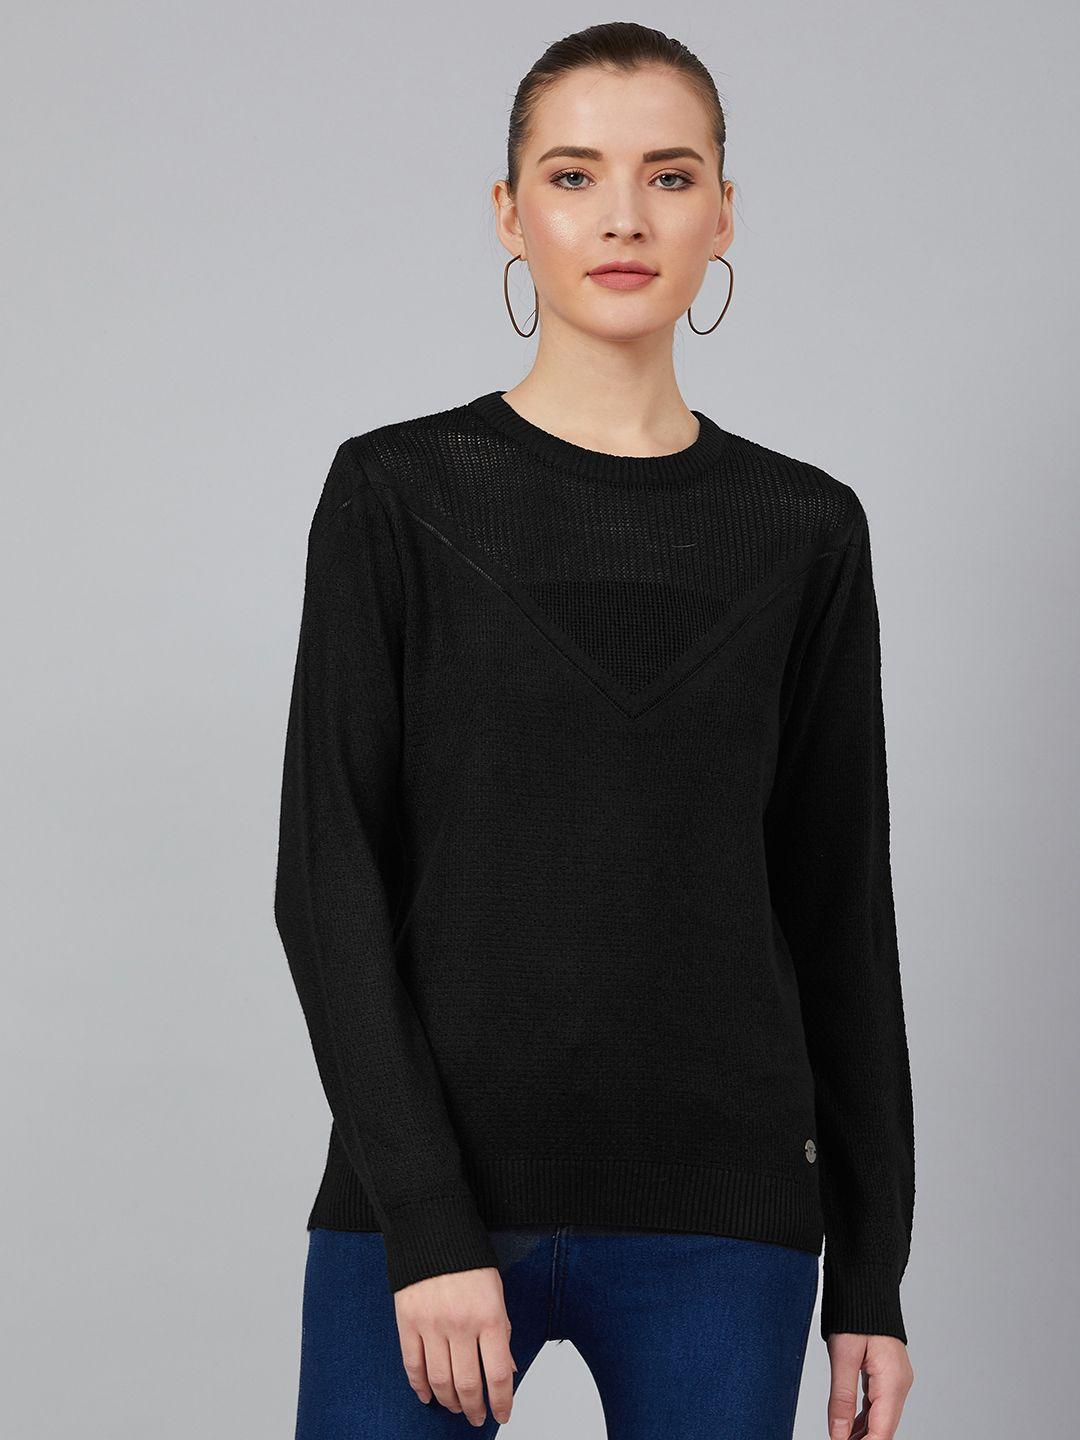 cayman-women-black-solid-acrylic-sweater-with-self-design-detail